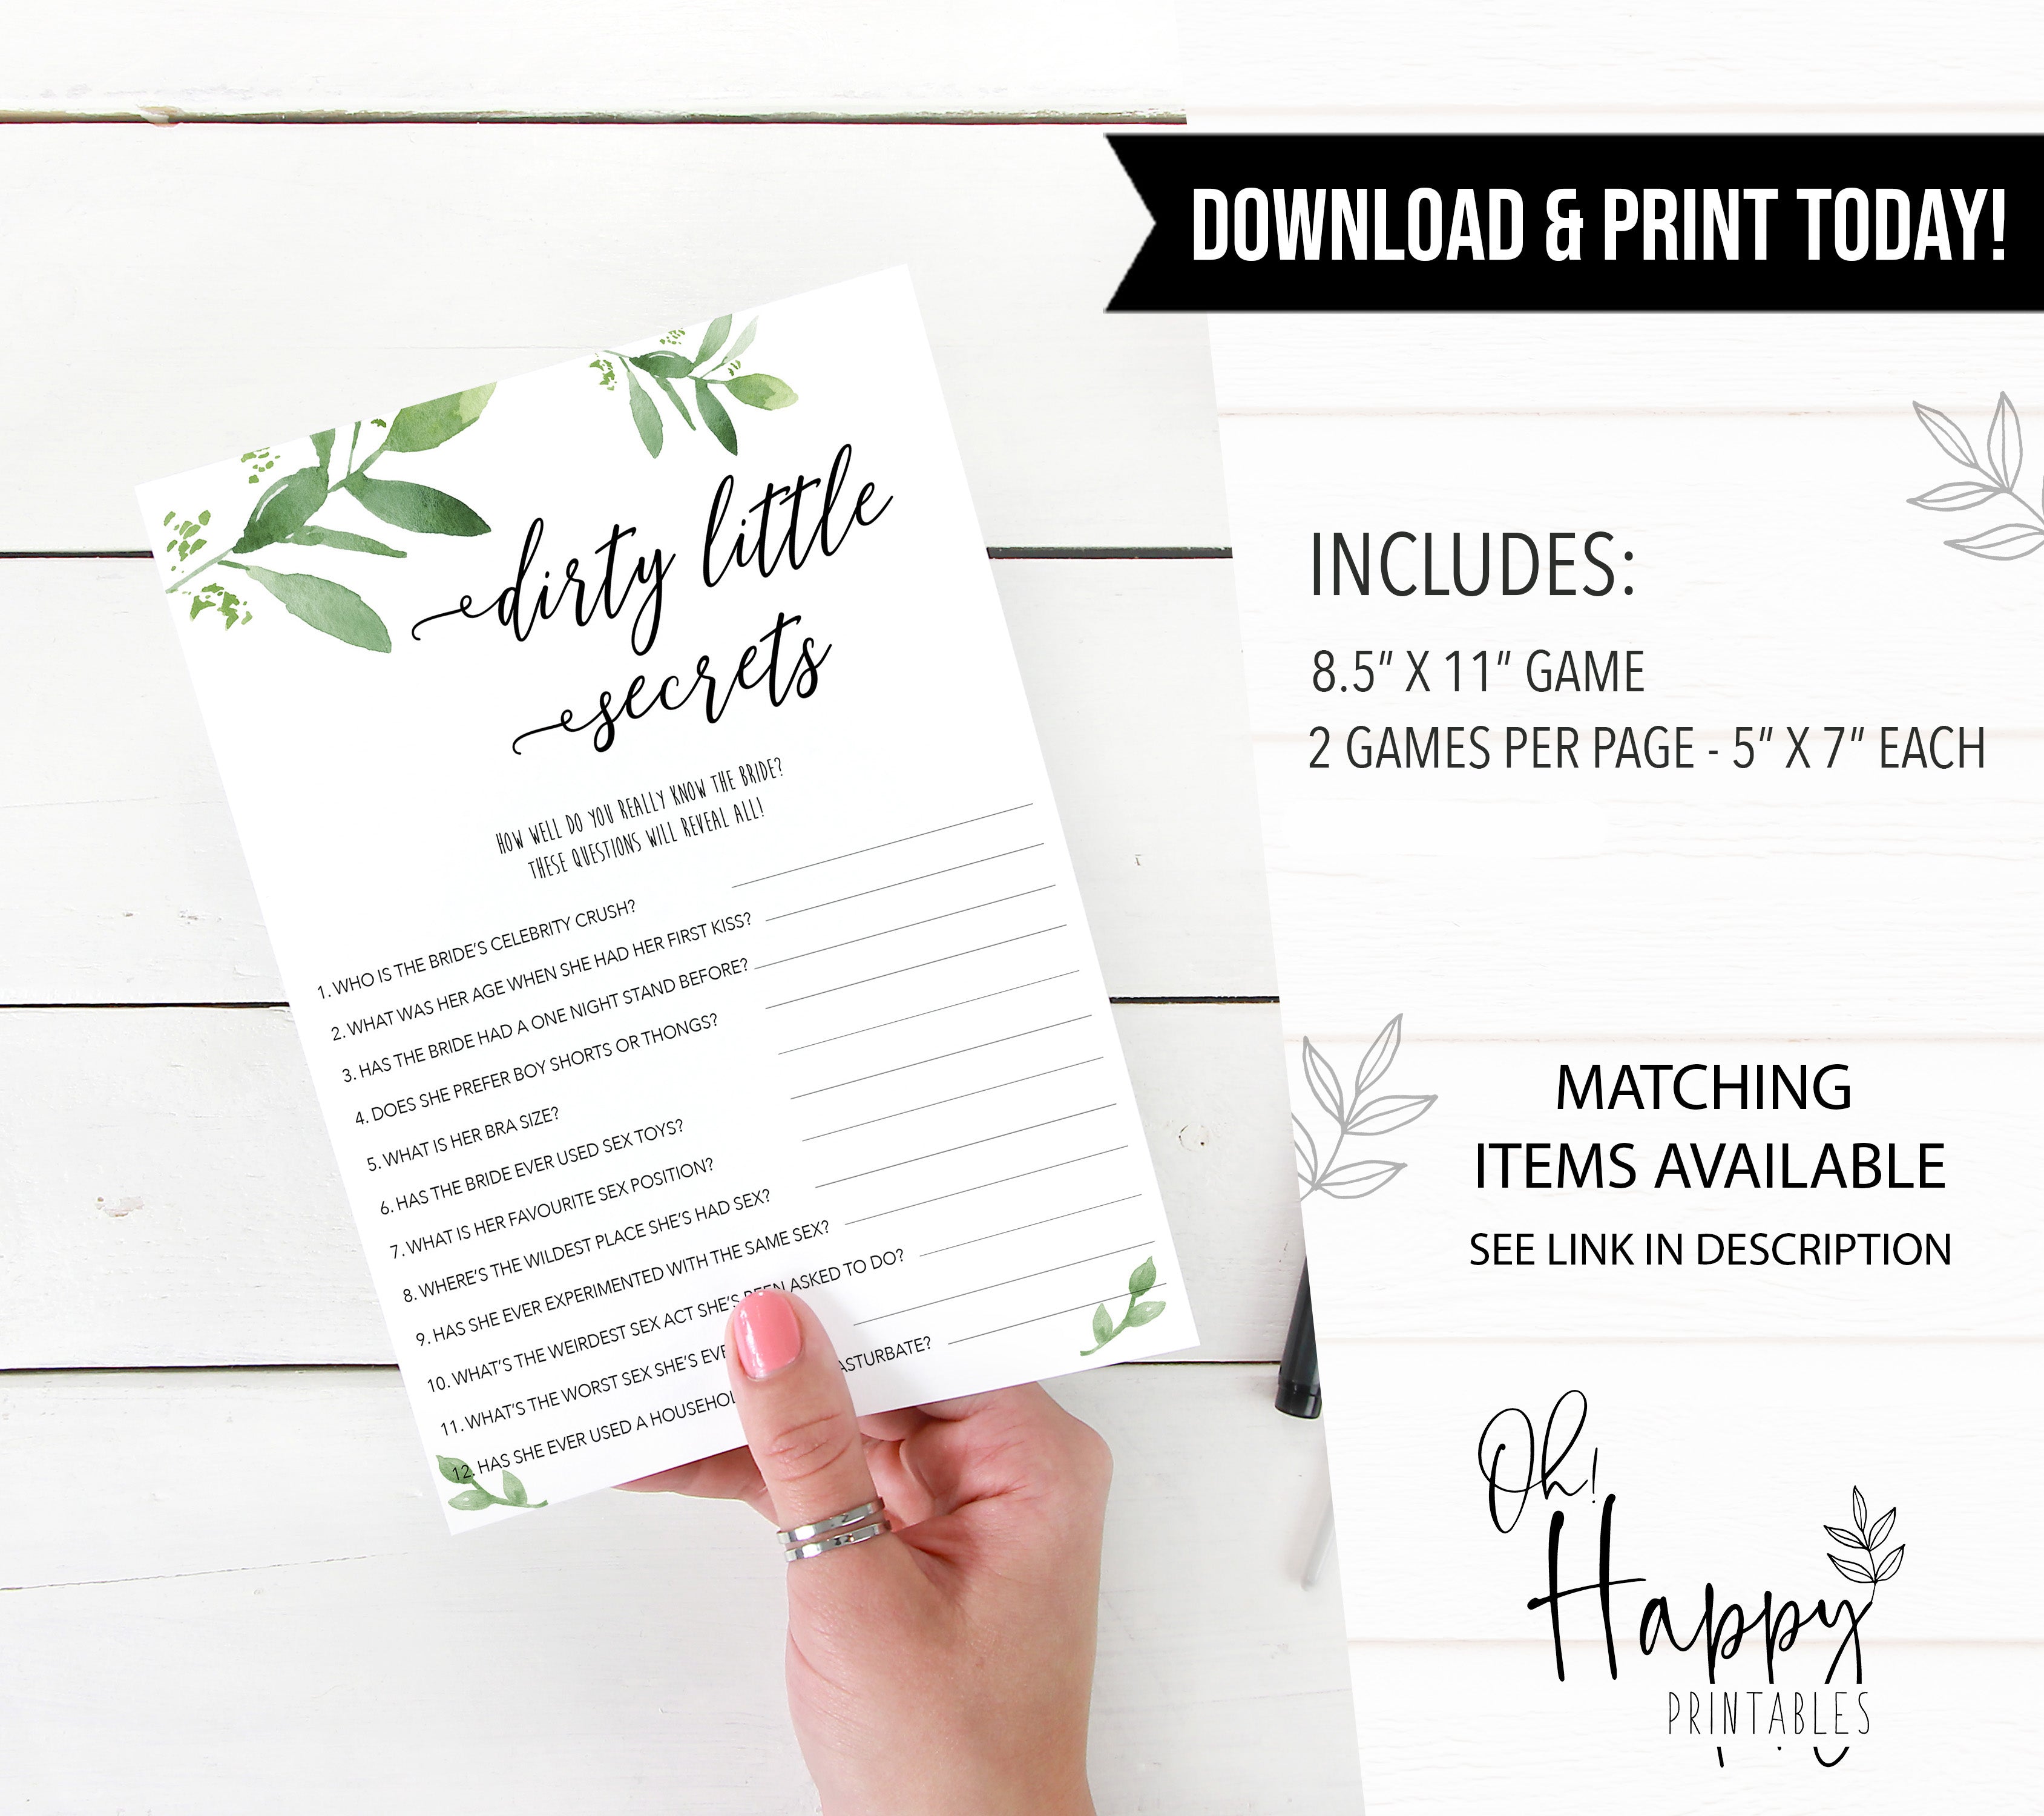 dirty little secrets game, greenery bridal shower, fun bridal shower games, bachelorette party games, floral bridal games, hen party ideas